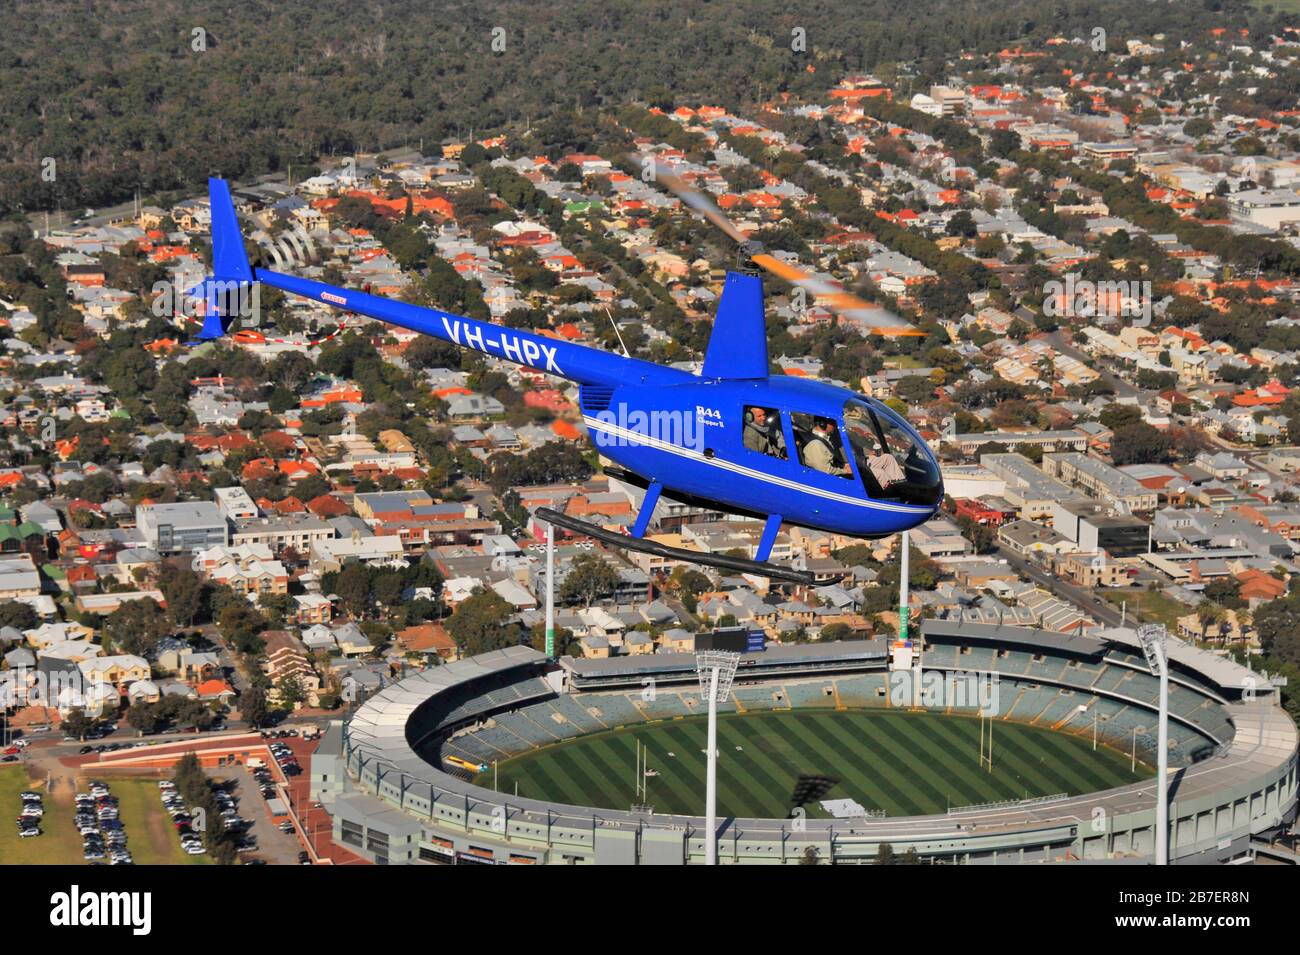 An air to air image of a Robinson R44 helicopter on a scenic flight over the city of Perth, Western Australia. Stock Photo